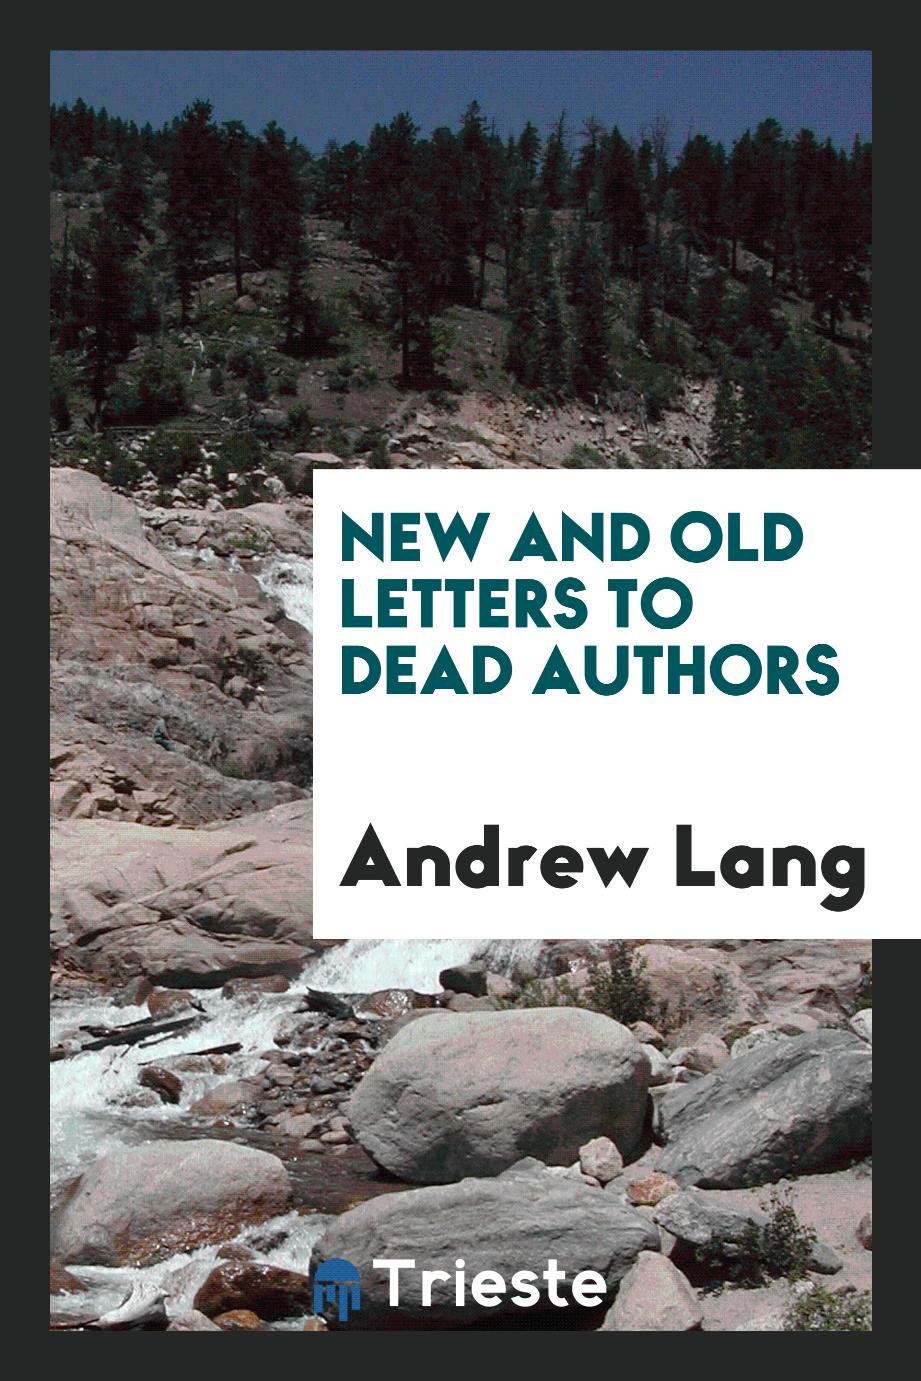 New and old letters to dead authors